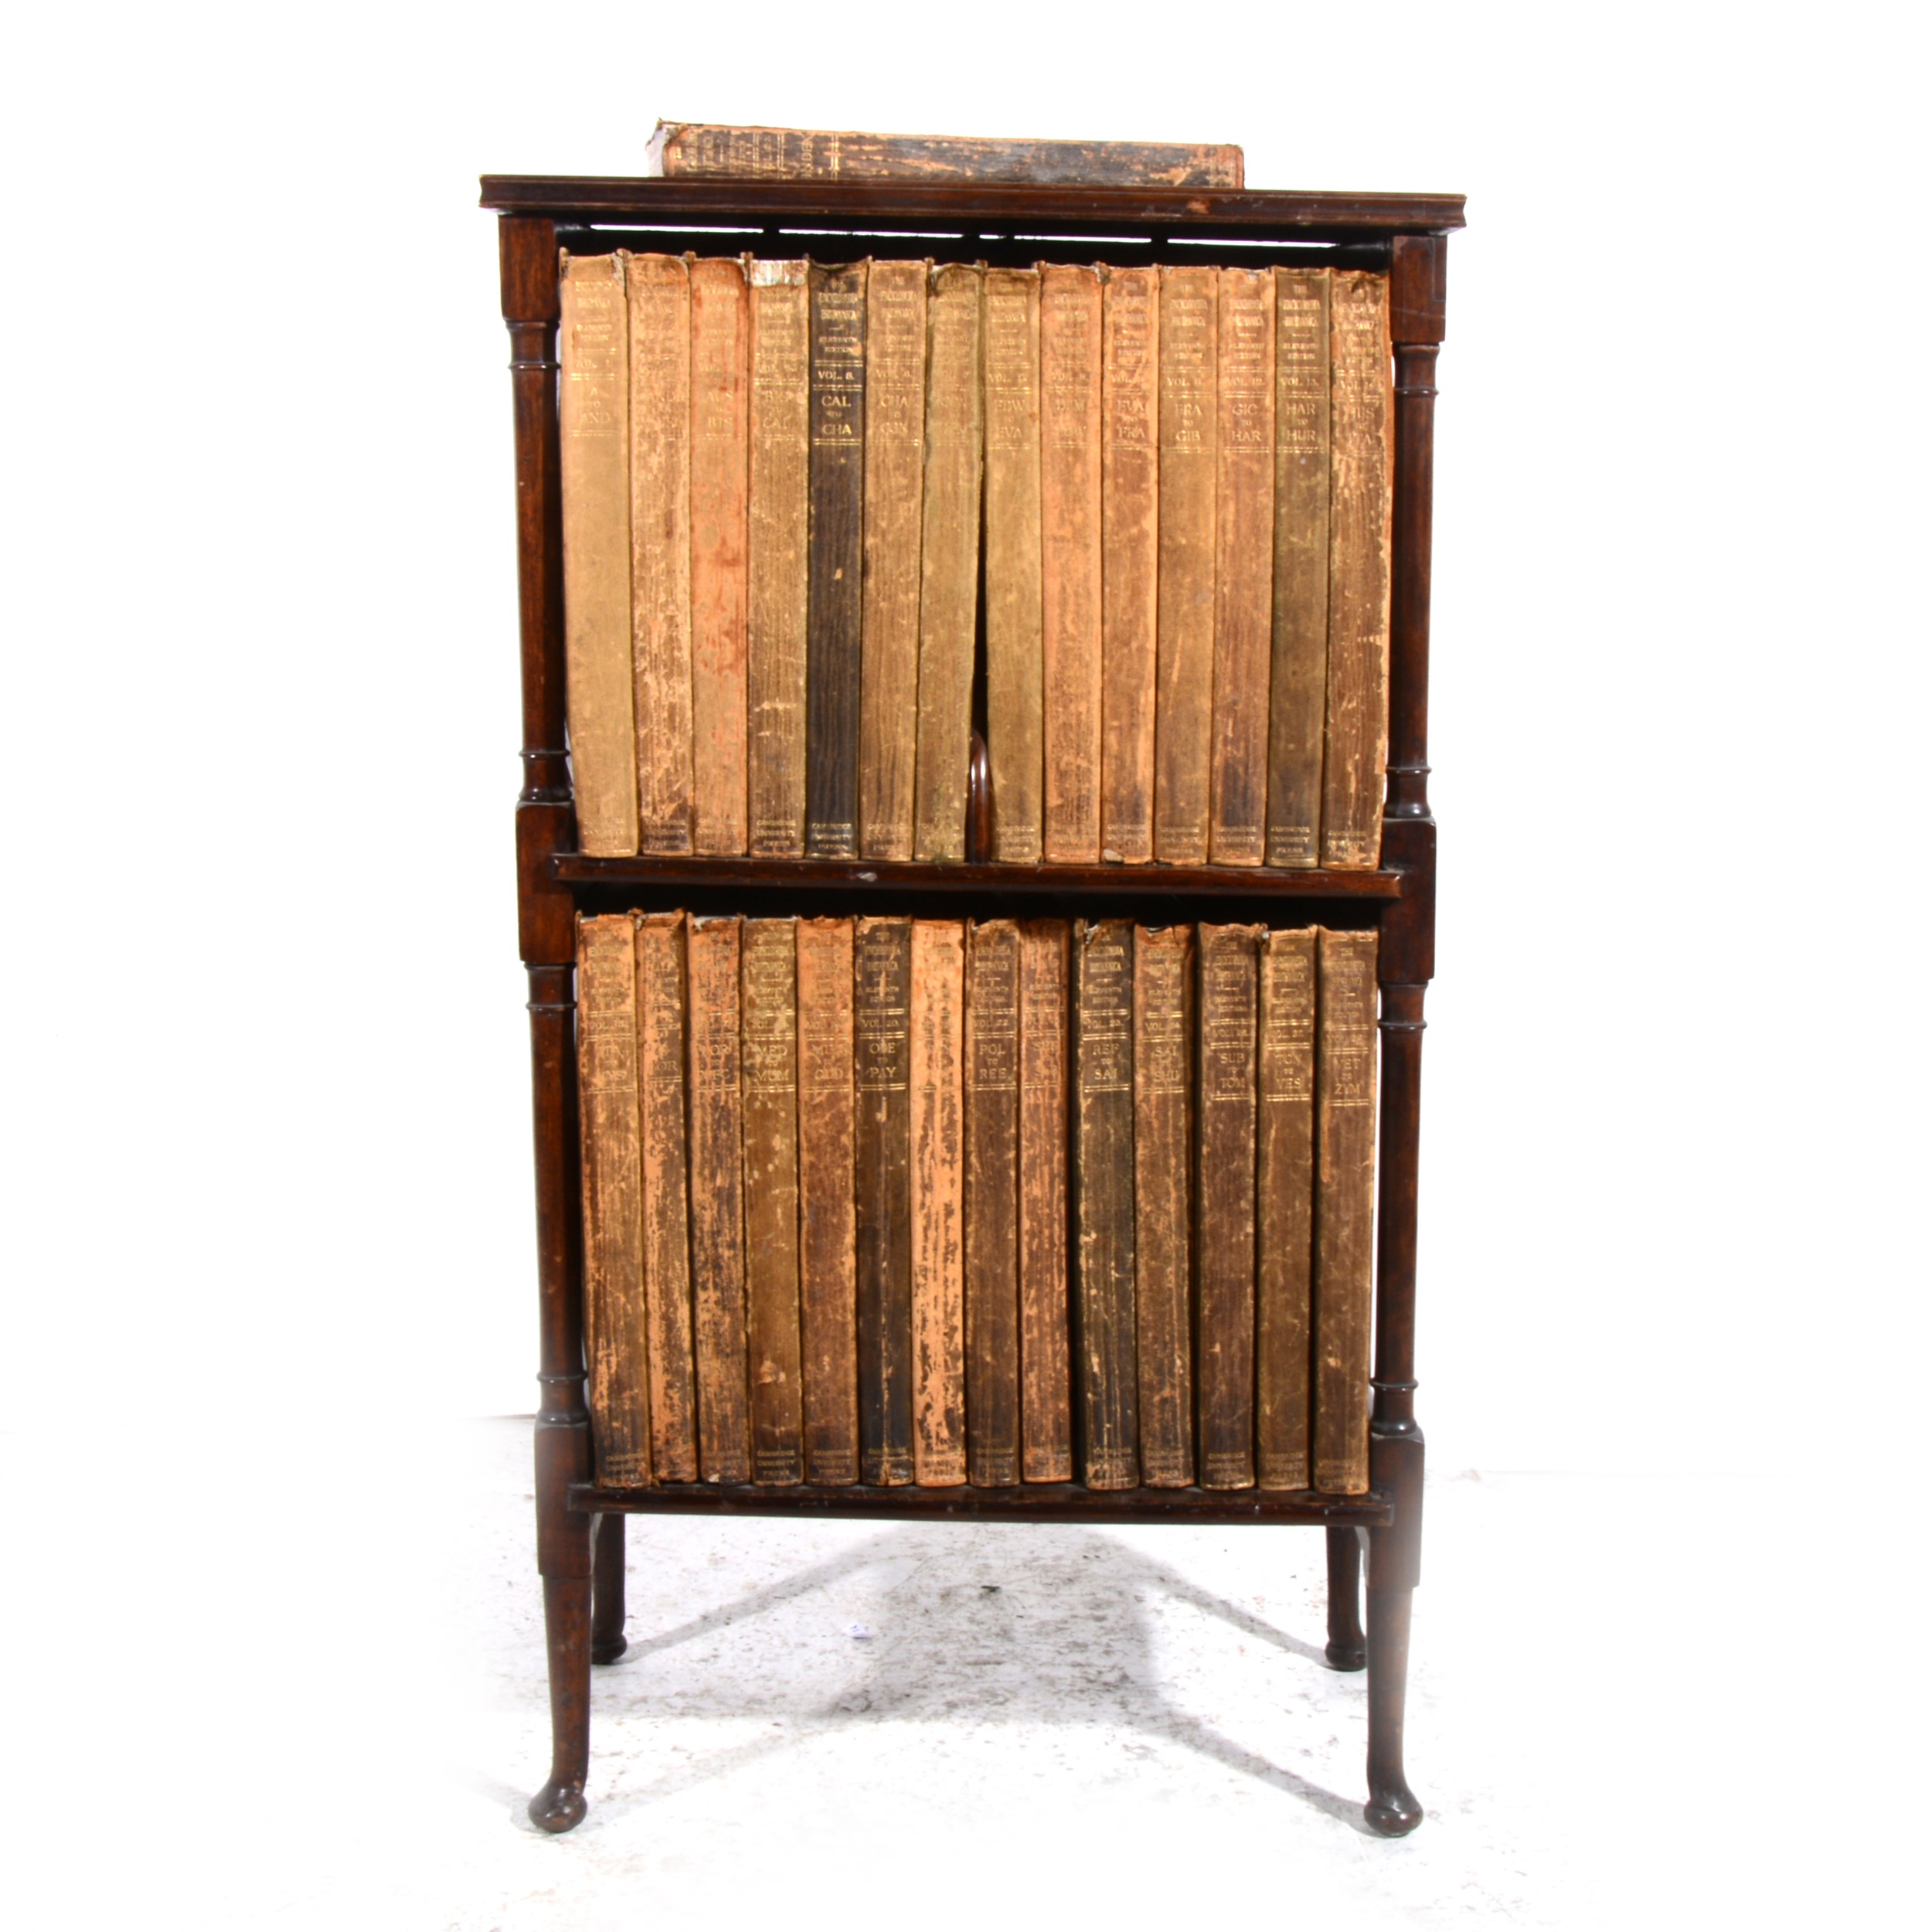 An Edwardian mahogany book stand/ side table